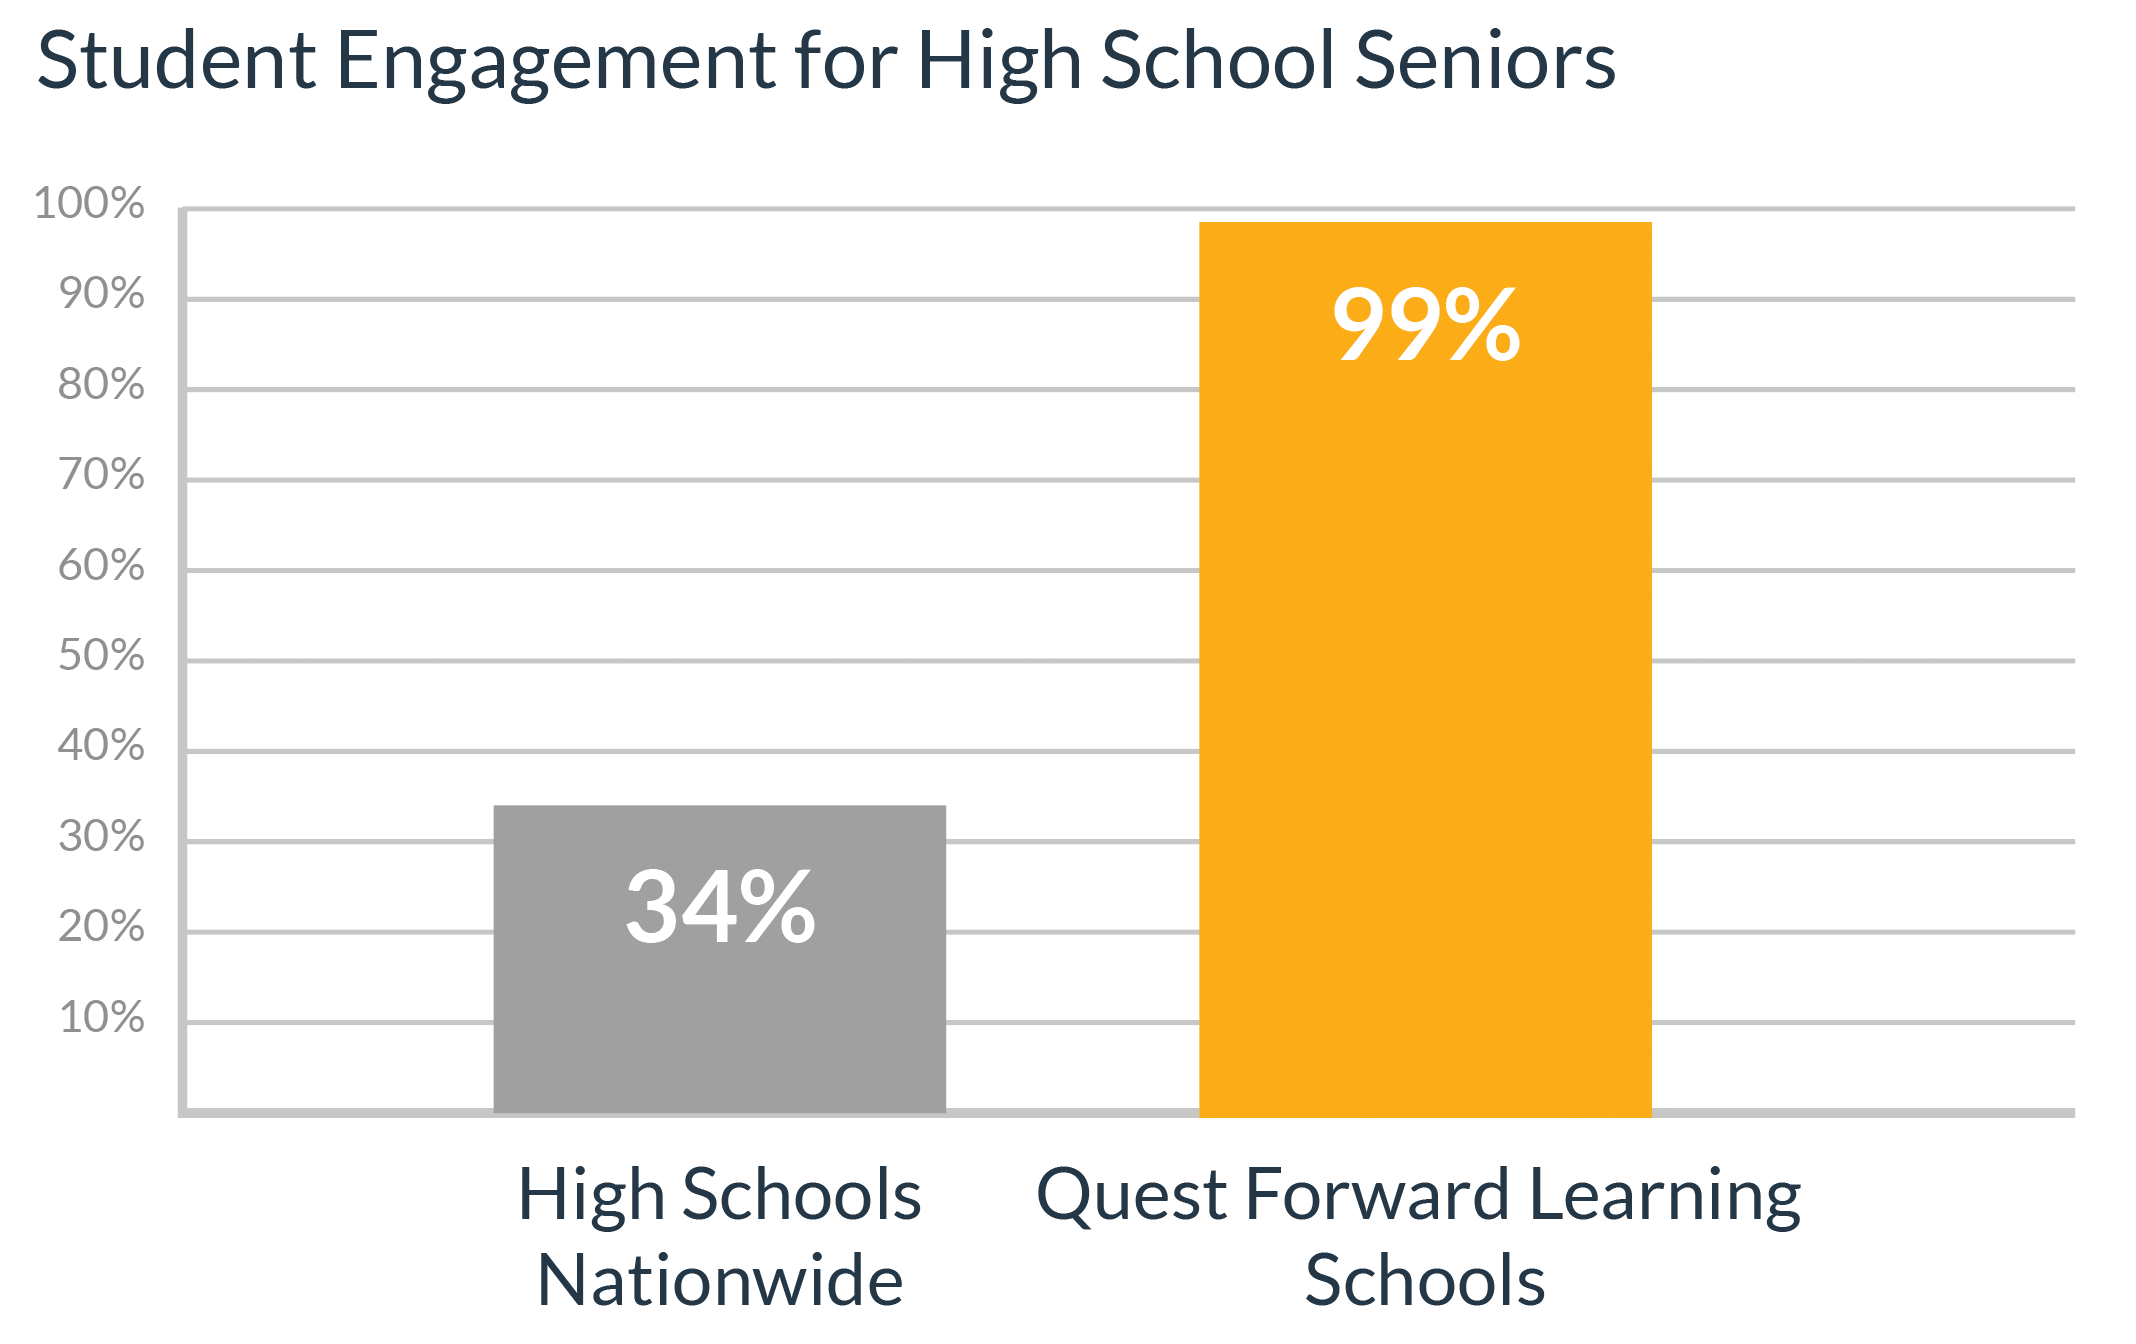 A graph shows student engagement at Quest Forward Learning schools significantly higher than at high schools nationwide as reported in Gallup surveys.